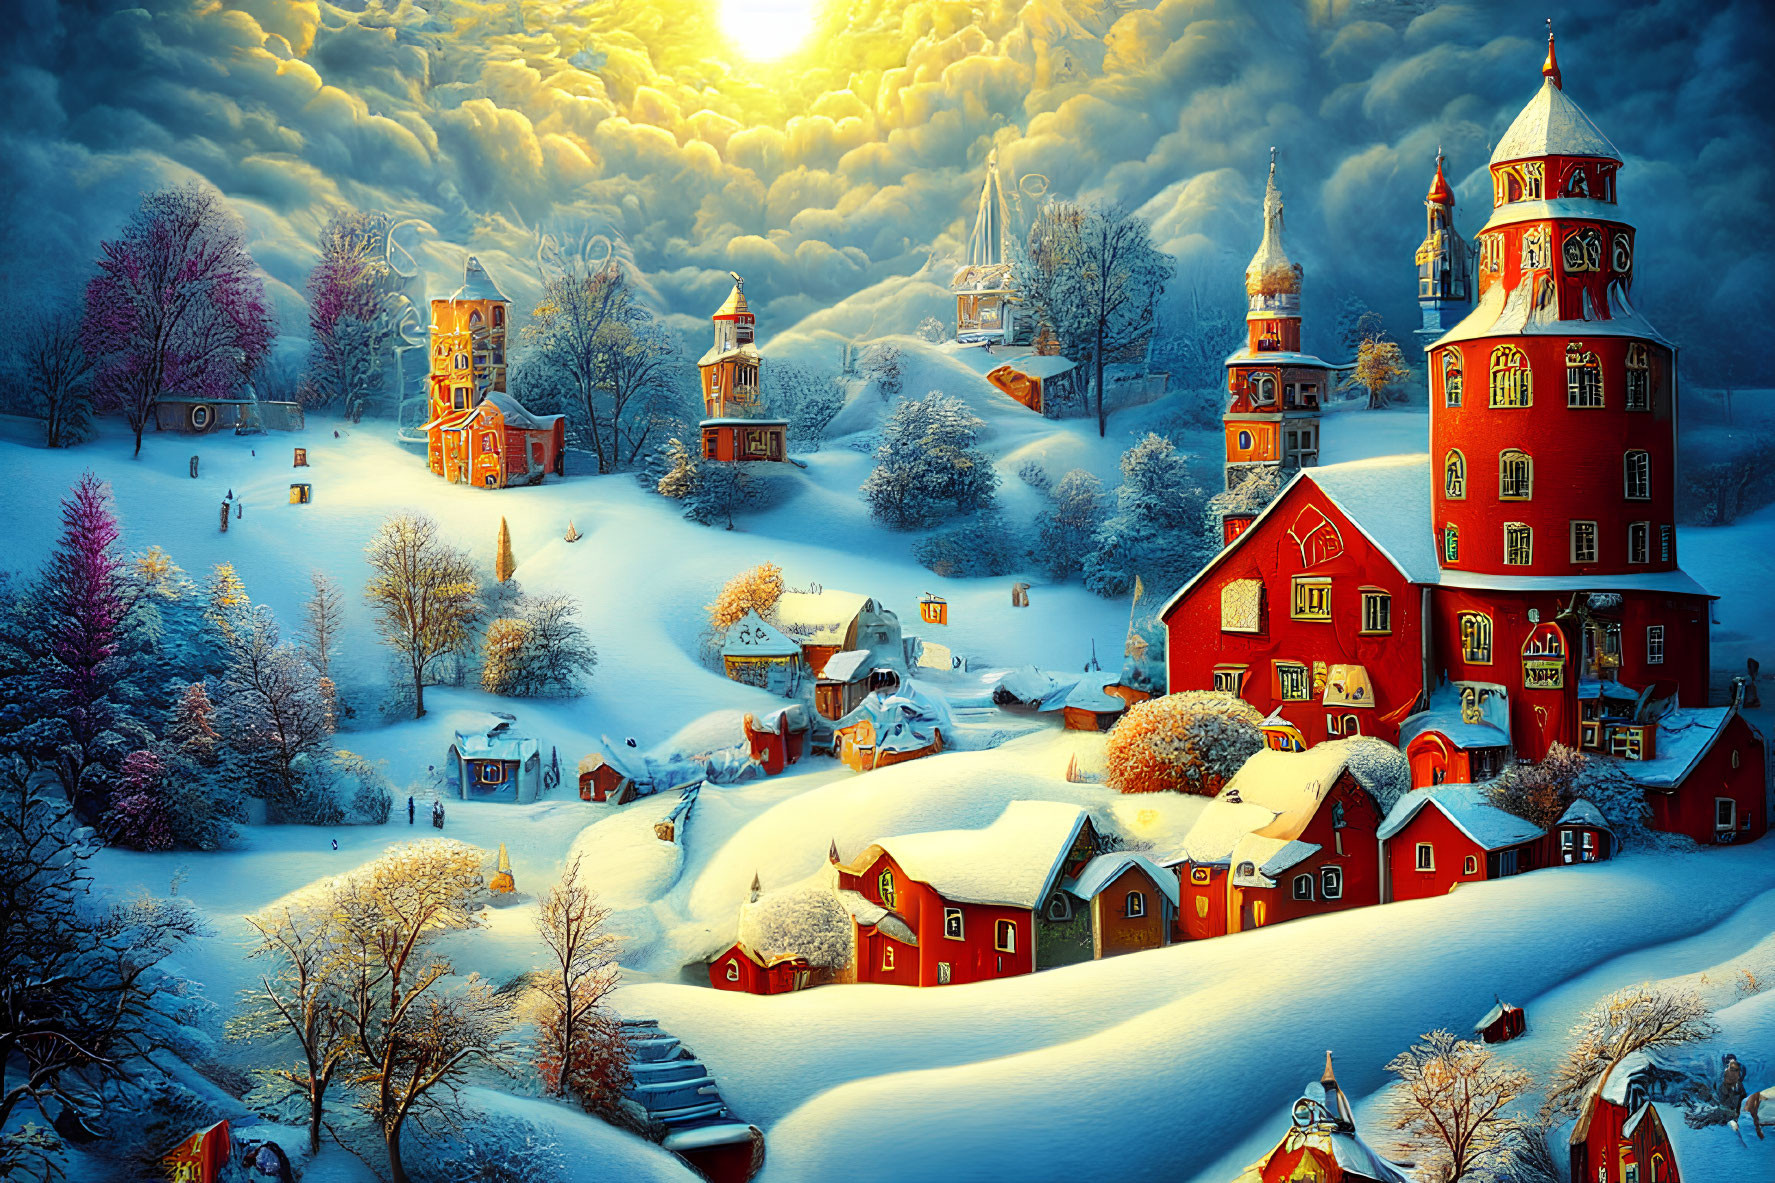 Snow-covered houses in golden sunset over fairytale village